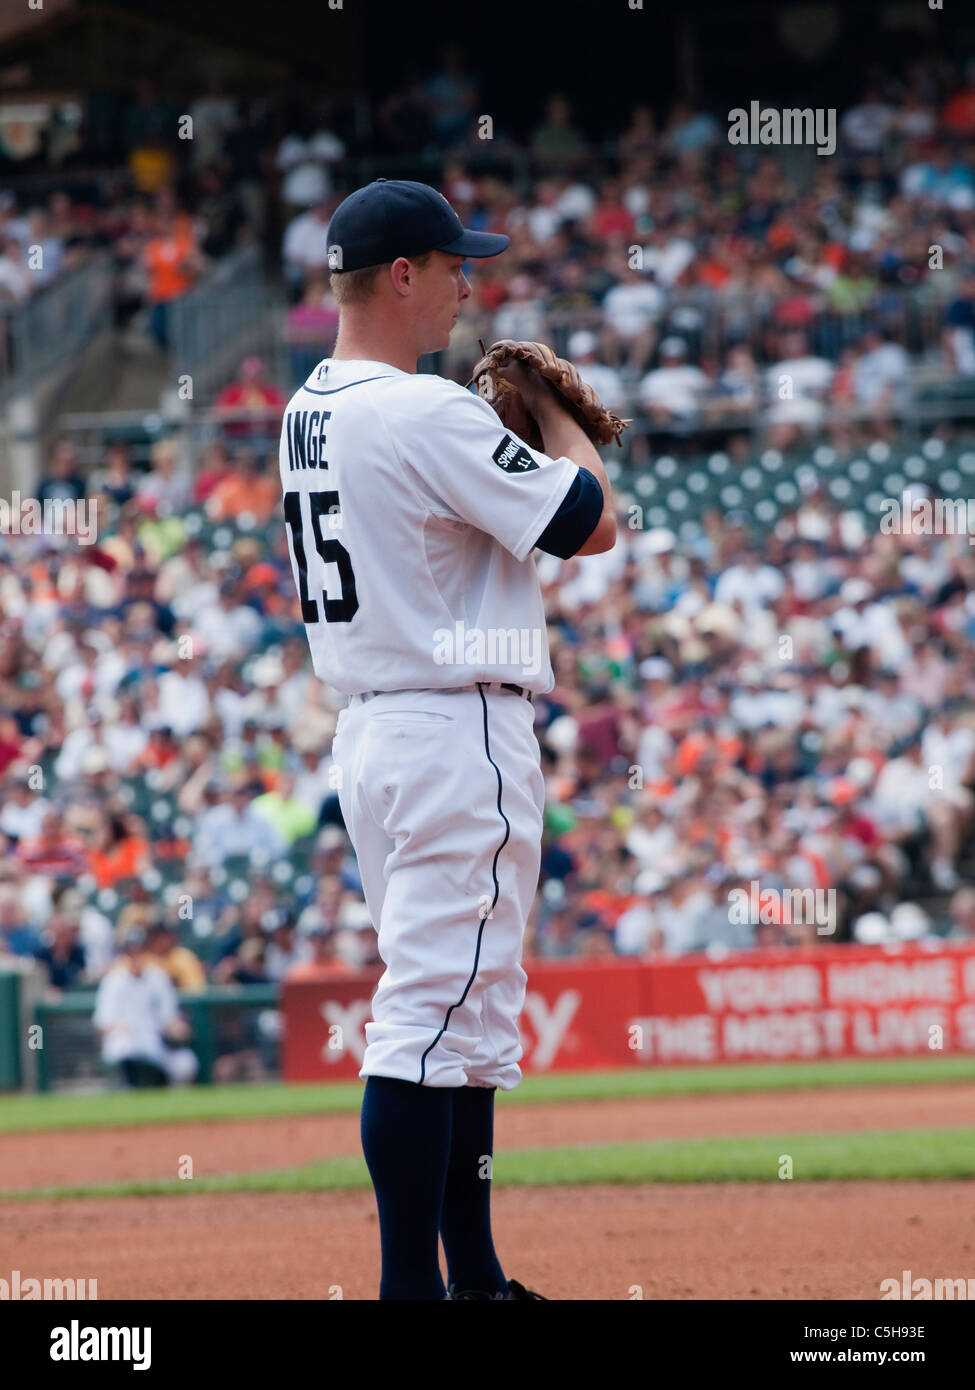 OBranden Inge at 3rd base during the July 3, 2011 MLB gave between the Detroit Tigers and the San Francis Stock Photo